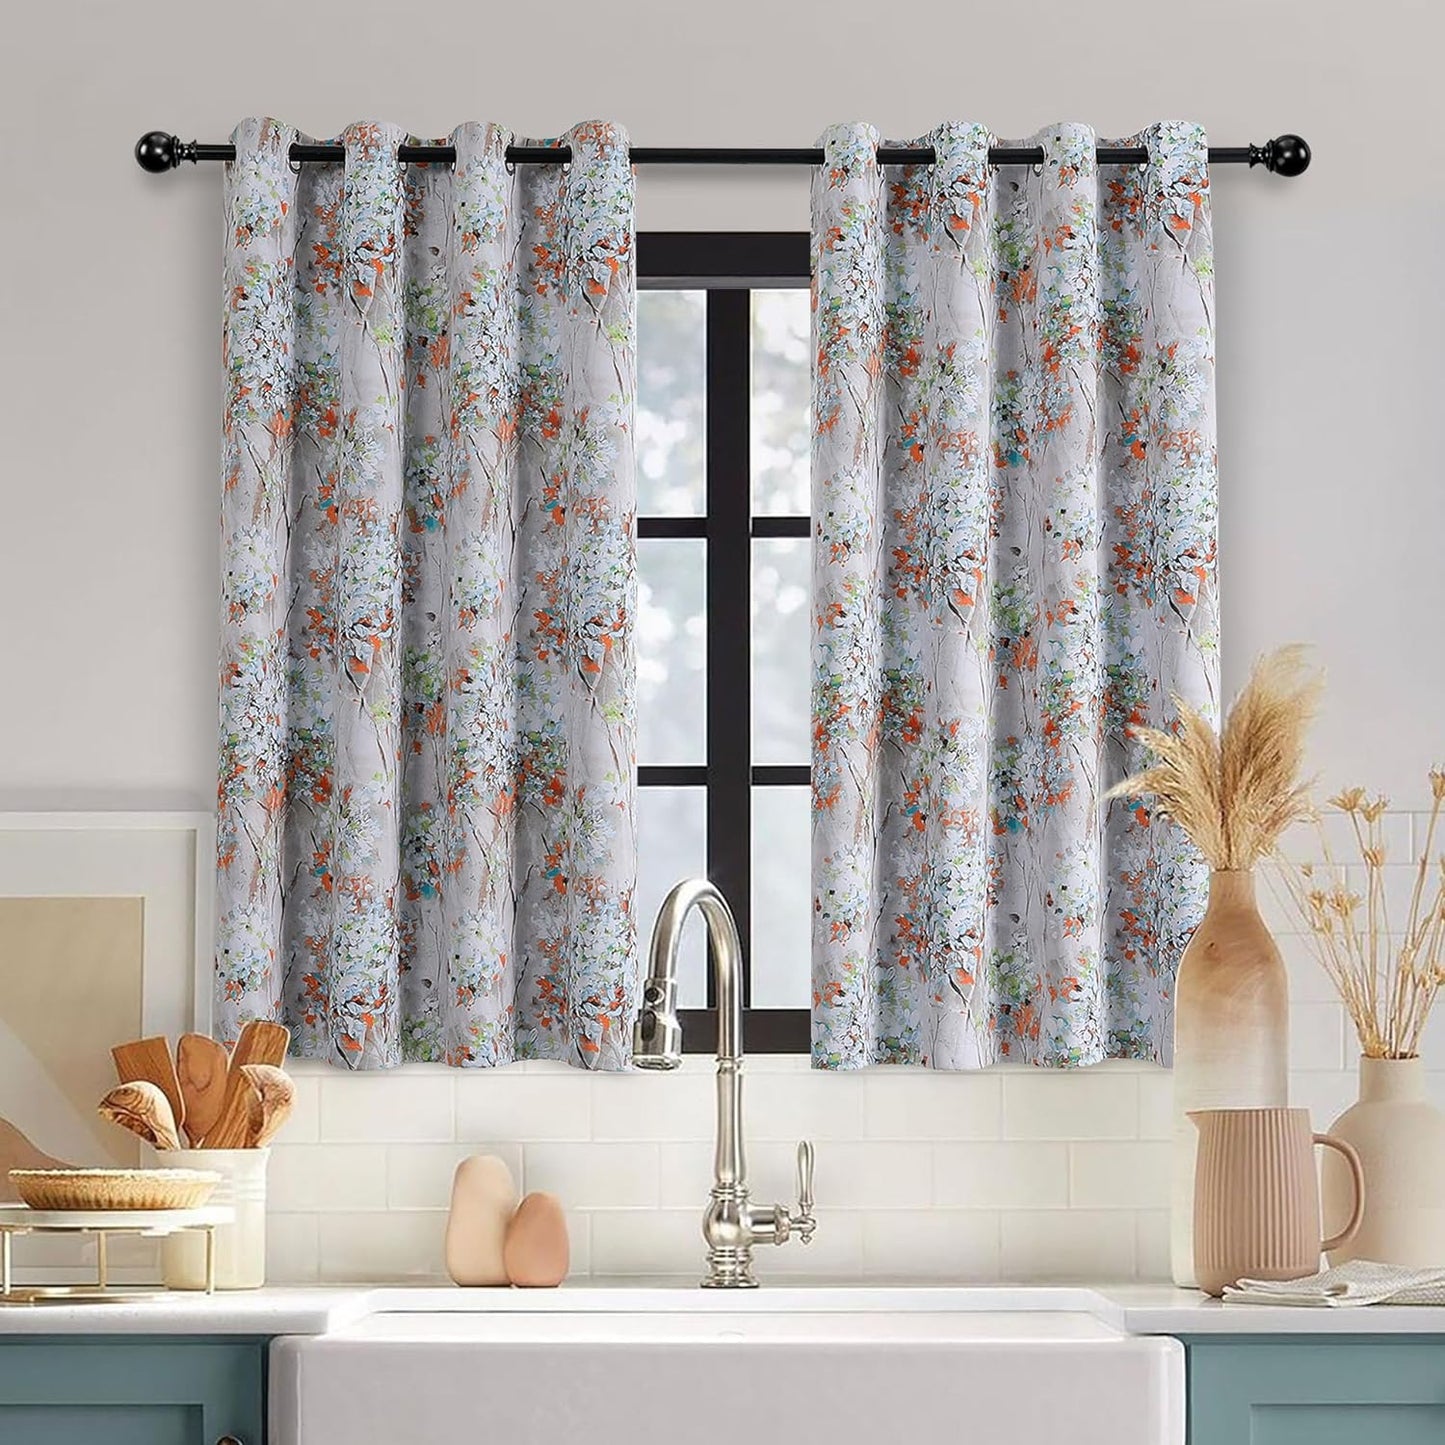 MYSKY HOME Floral Blackout Curtains 84 Inches Long 2 Panels Pink and Blue Floral Thermal Insulated Ink Vintage Flower Printed Window Grommet for Bedroom Living Room  MYSKYTEX B-Green  Orange 52''W X 45''L 